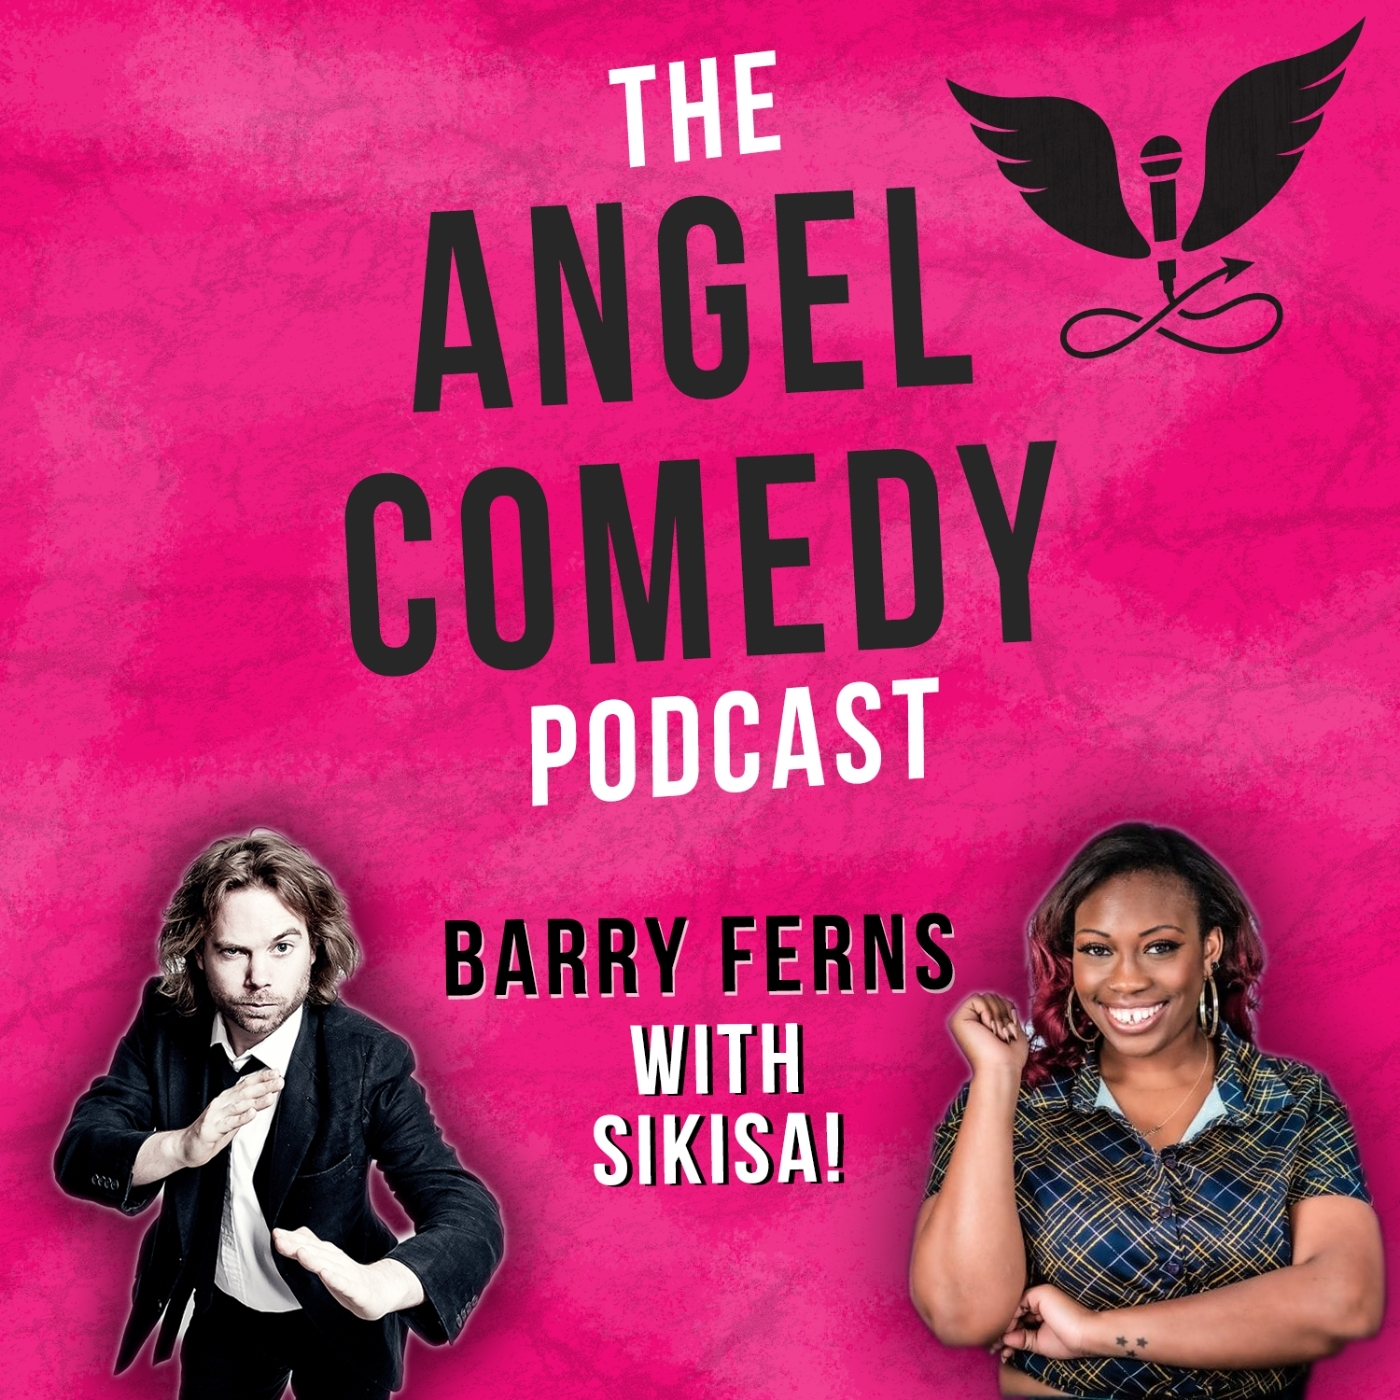 The Angel Comedy Podcast with Sikisa!